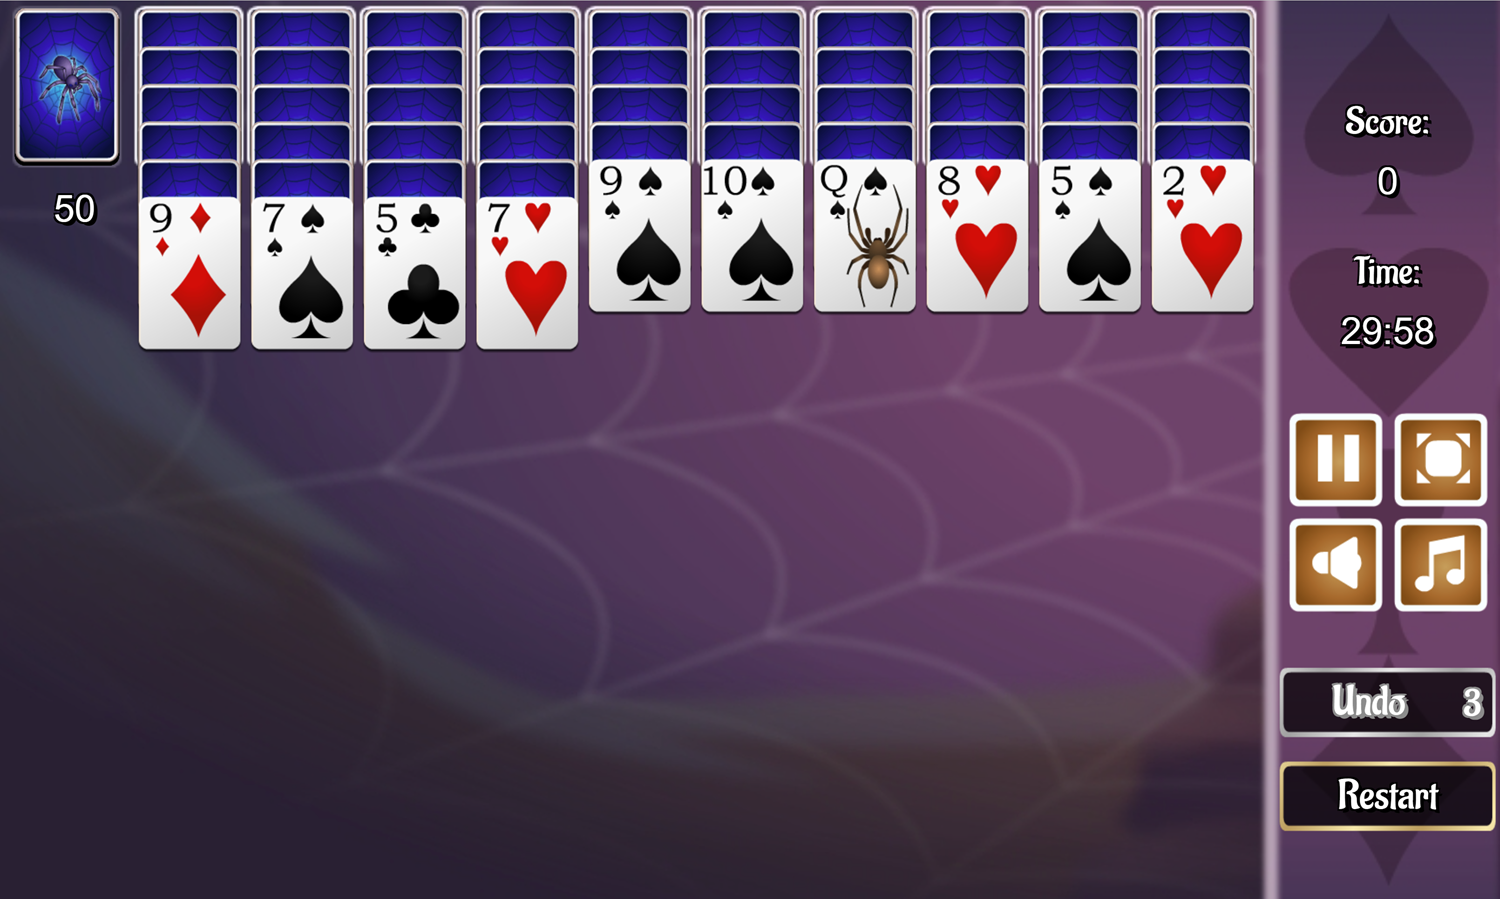 4 Suits Spider Solitaire Game Deal Screenshot.